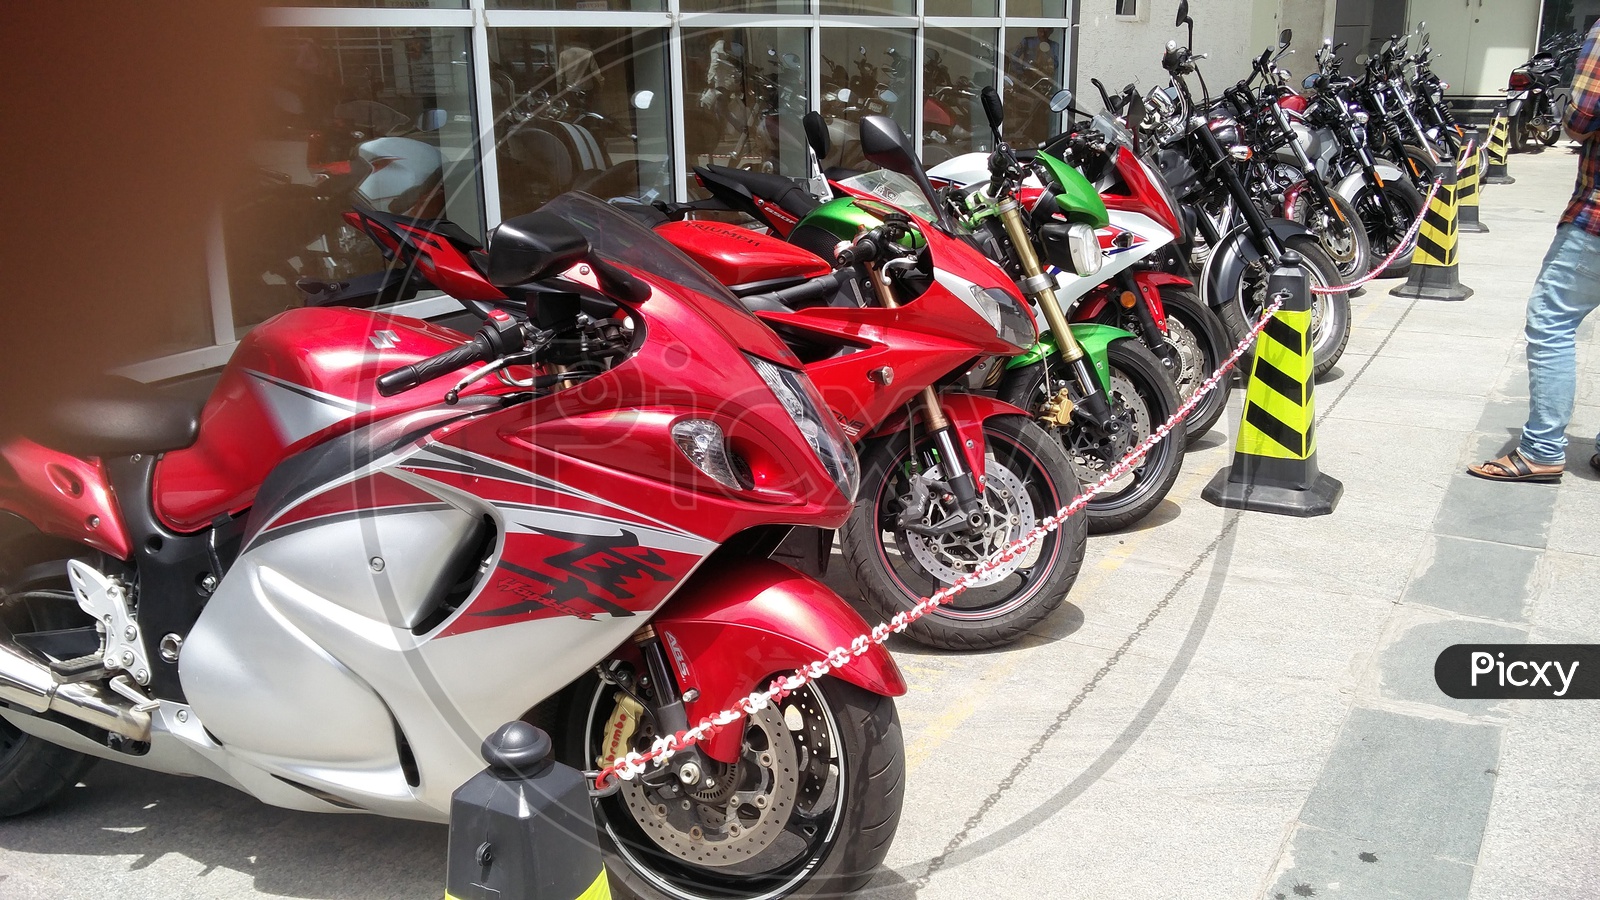 Image of Super Bikes Parked at a Store-ZF493833-Picxy